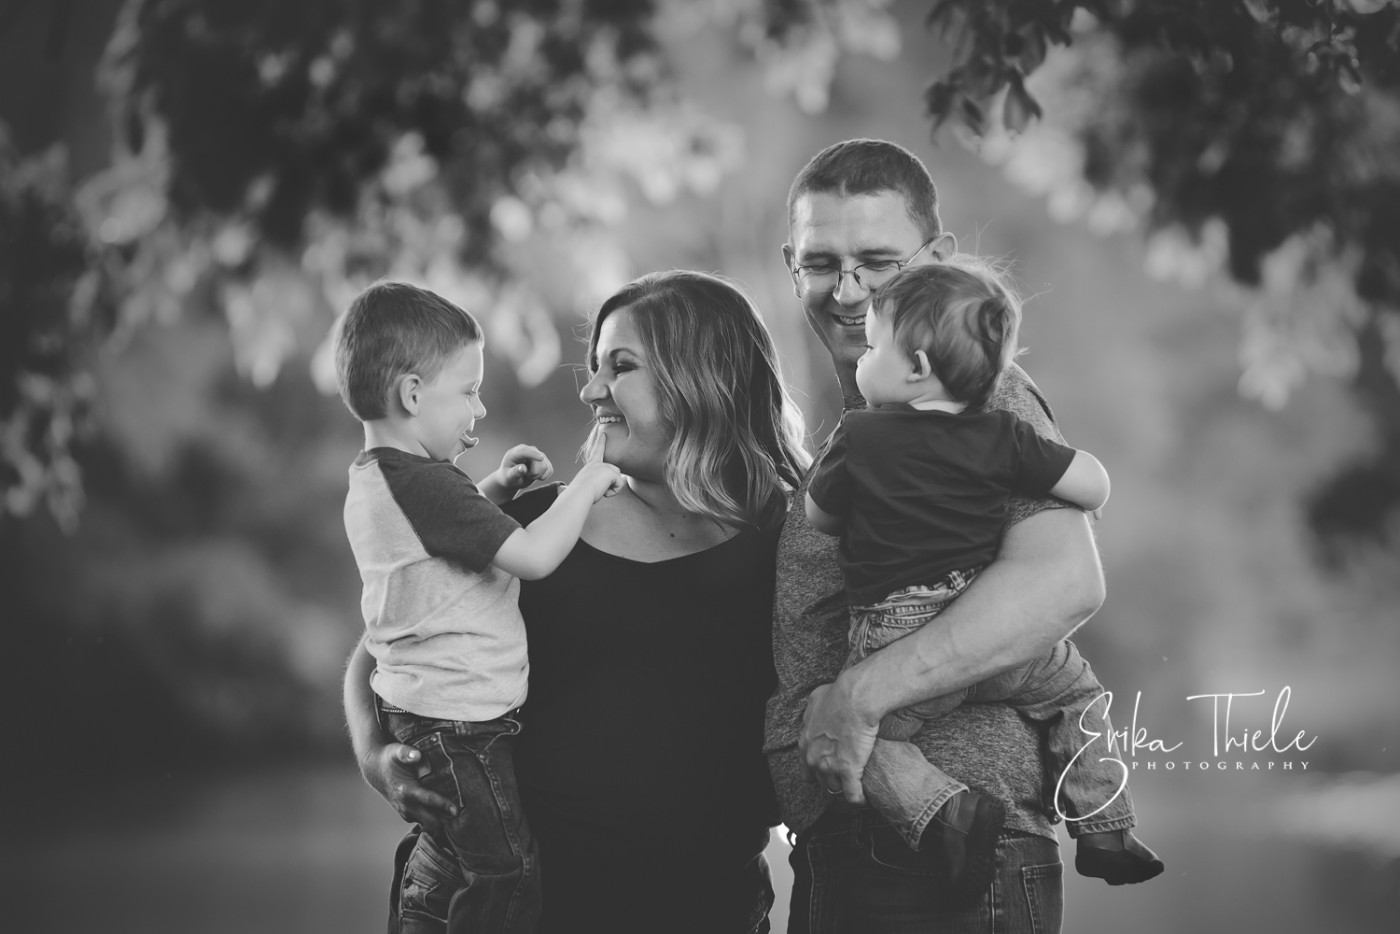 The Neubauer Family  |  An Outdoor Family Session 